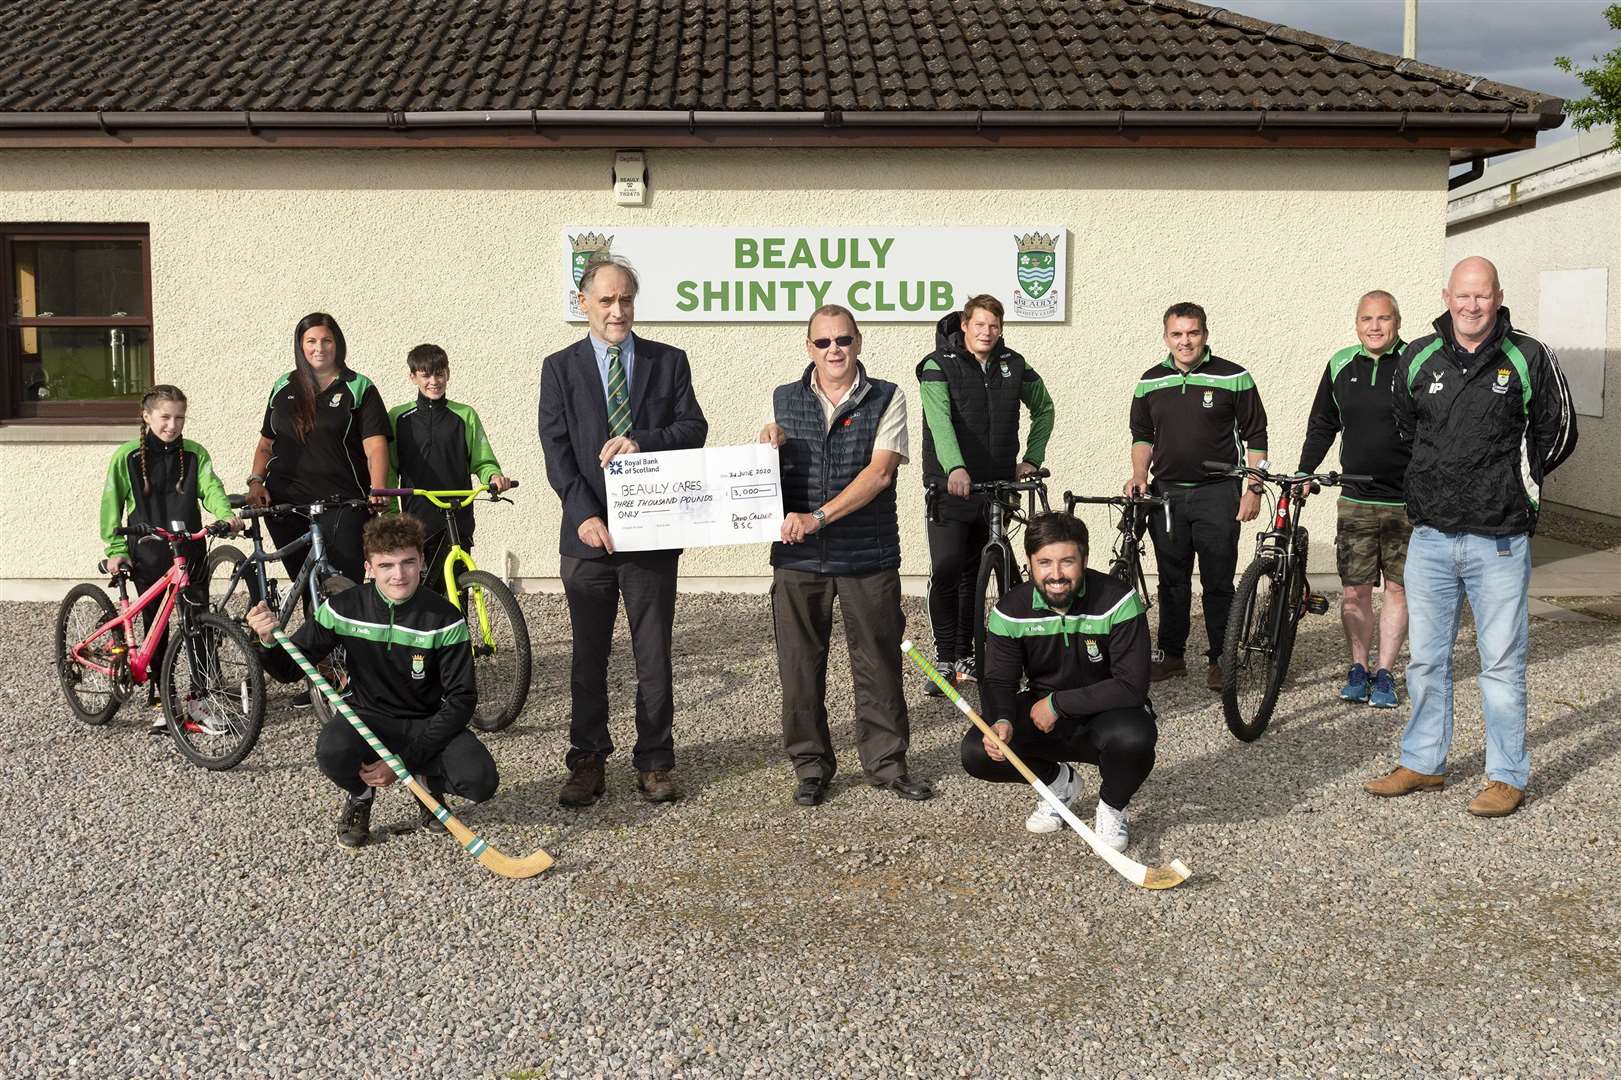 Beauly Shinty Club President David Calder (centre left) presents the £3000 cheque to George Borland of Beauly Cares.